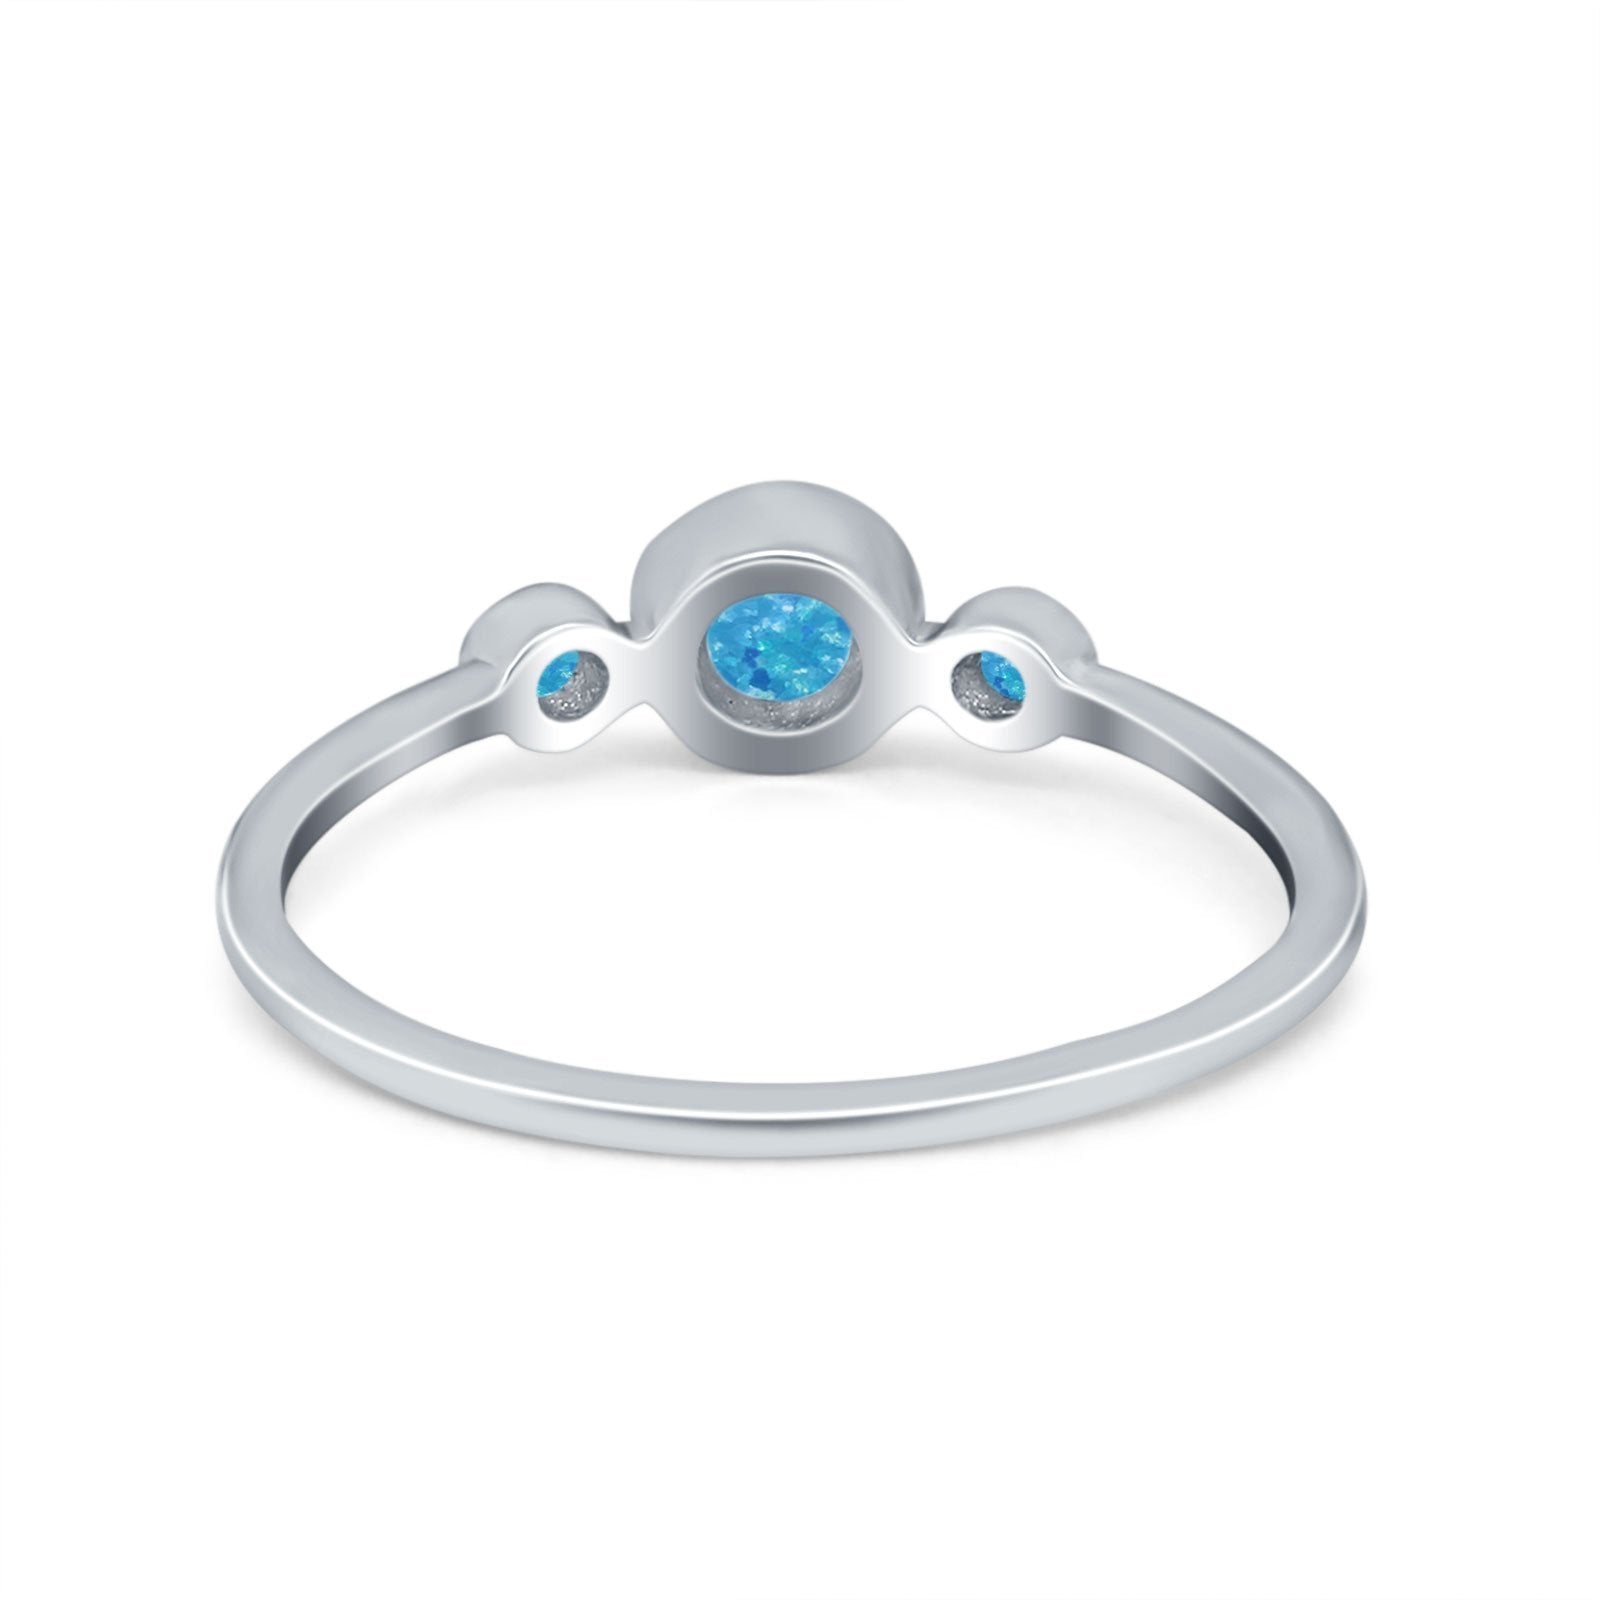 Fashion Style Band Ring Round Simulated Cubic Zirconia Opal 925 Sterling Silver